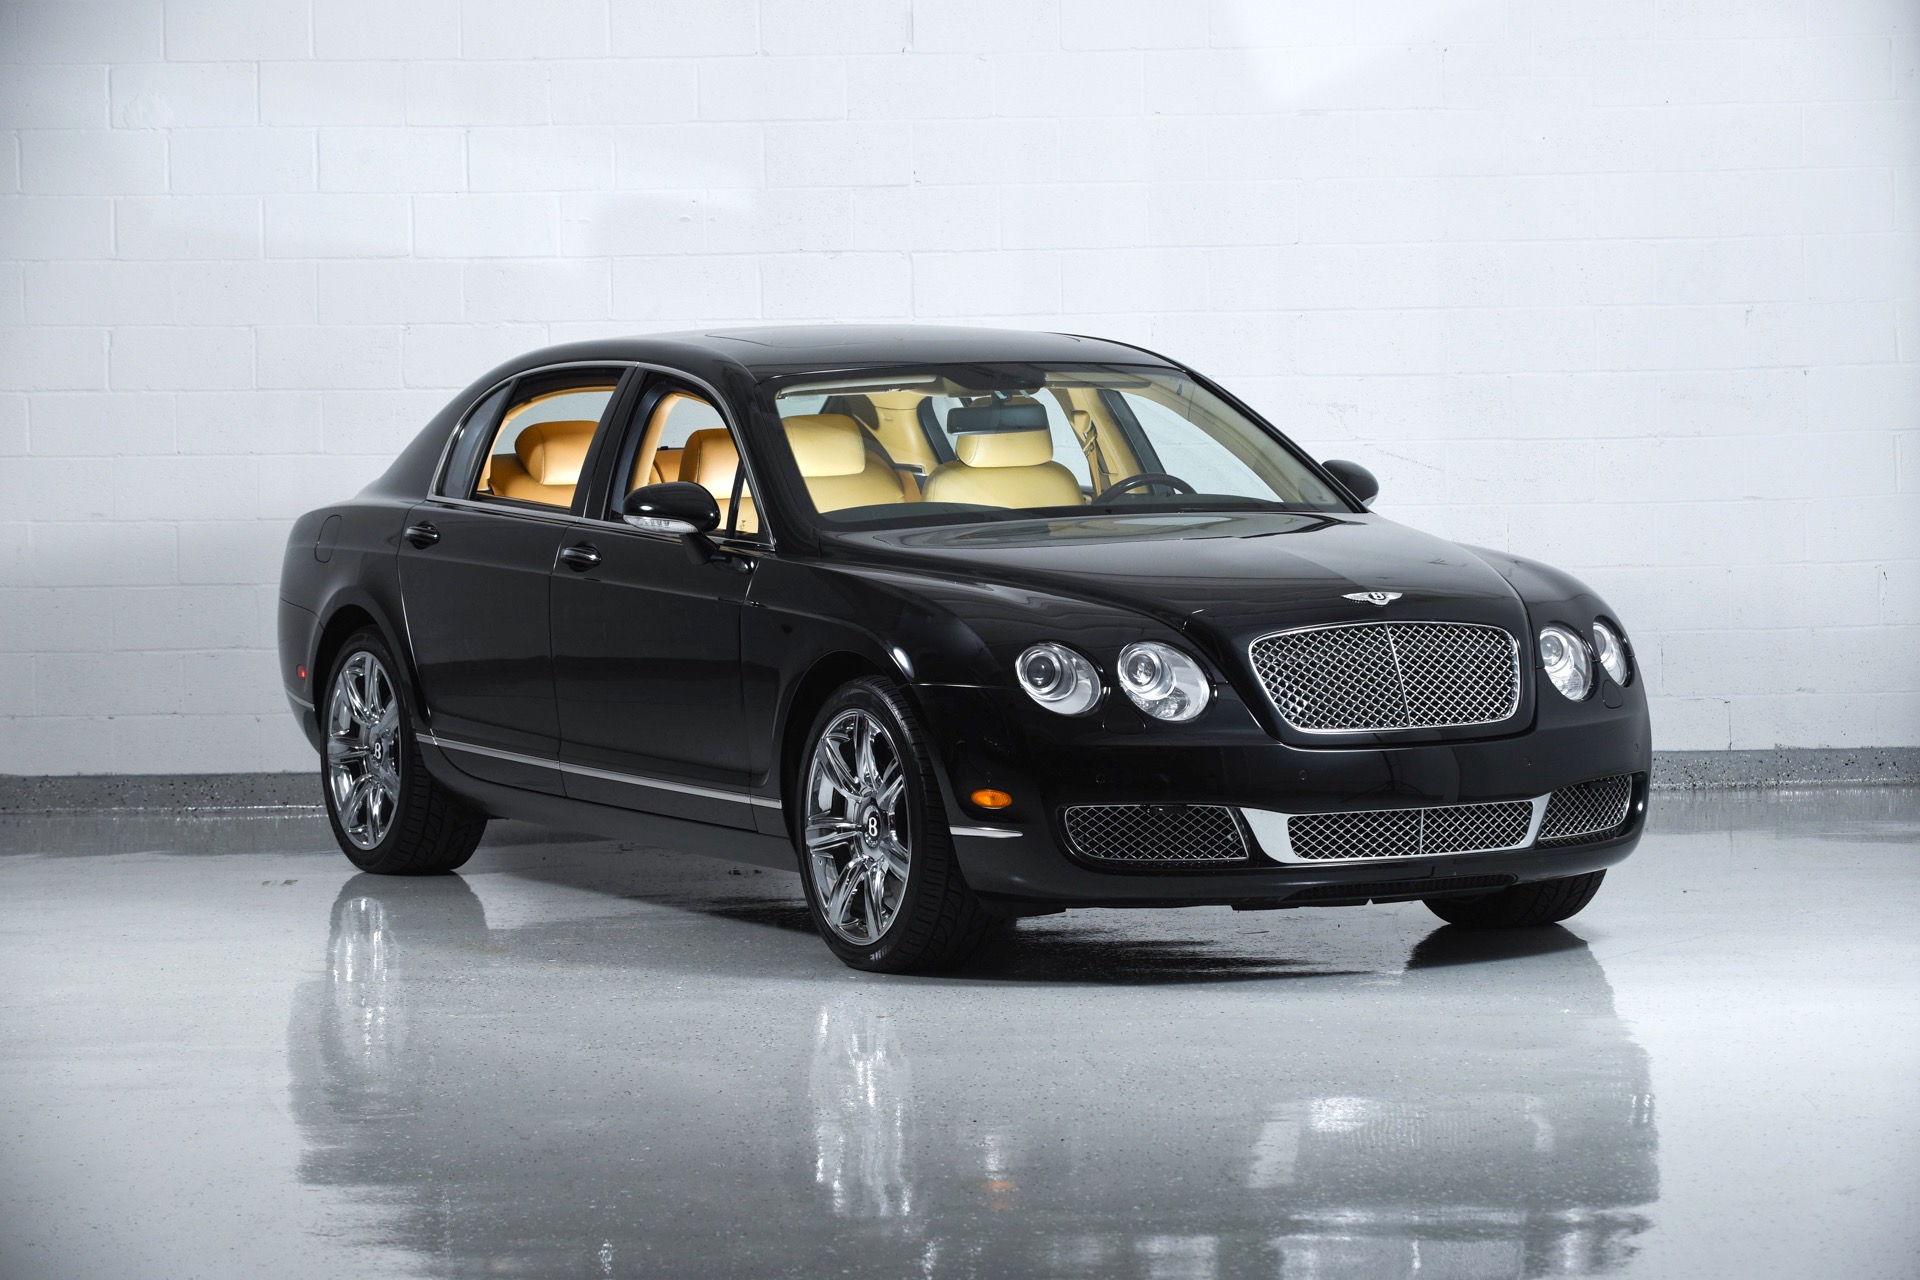 Used 2006 Bentley Continental Flying Spur For Sale ($49,900) | Motorcar  Classics Stock #1041